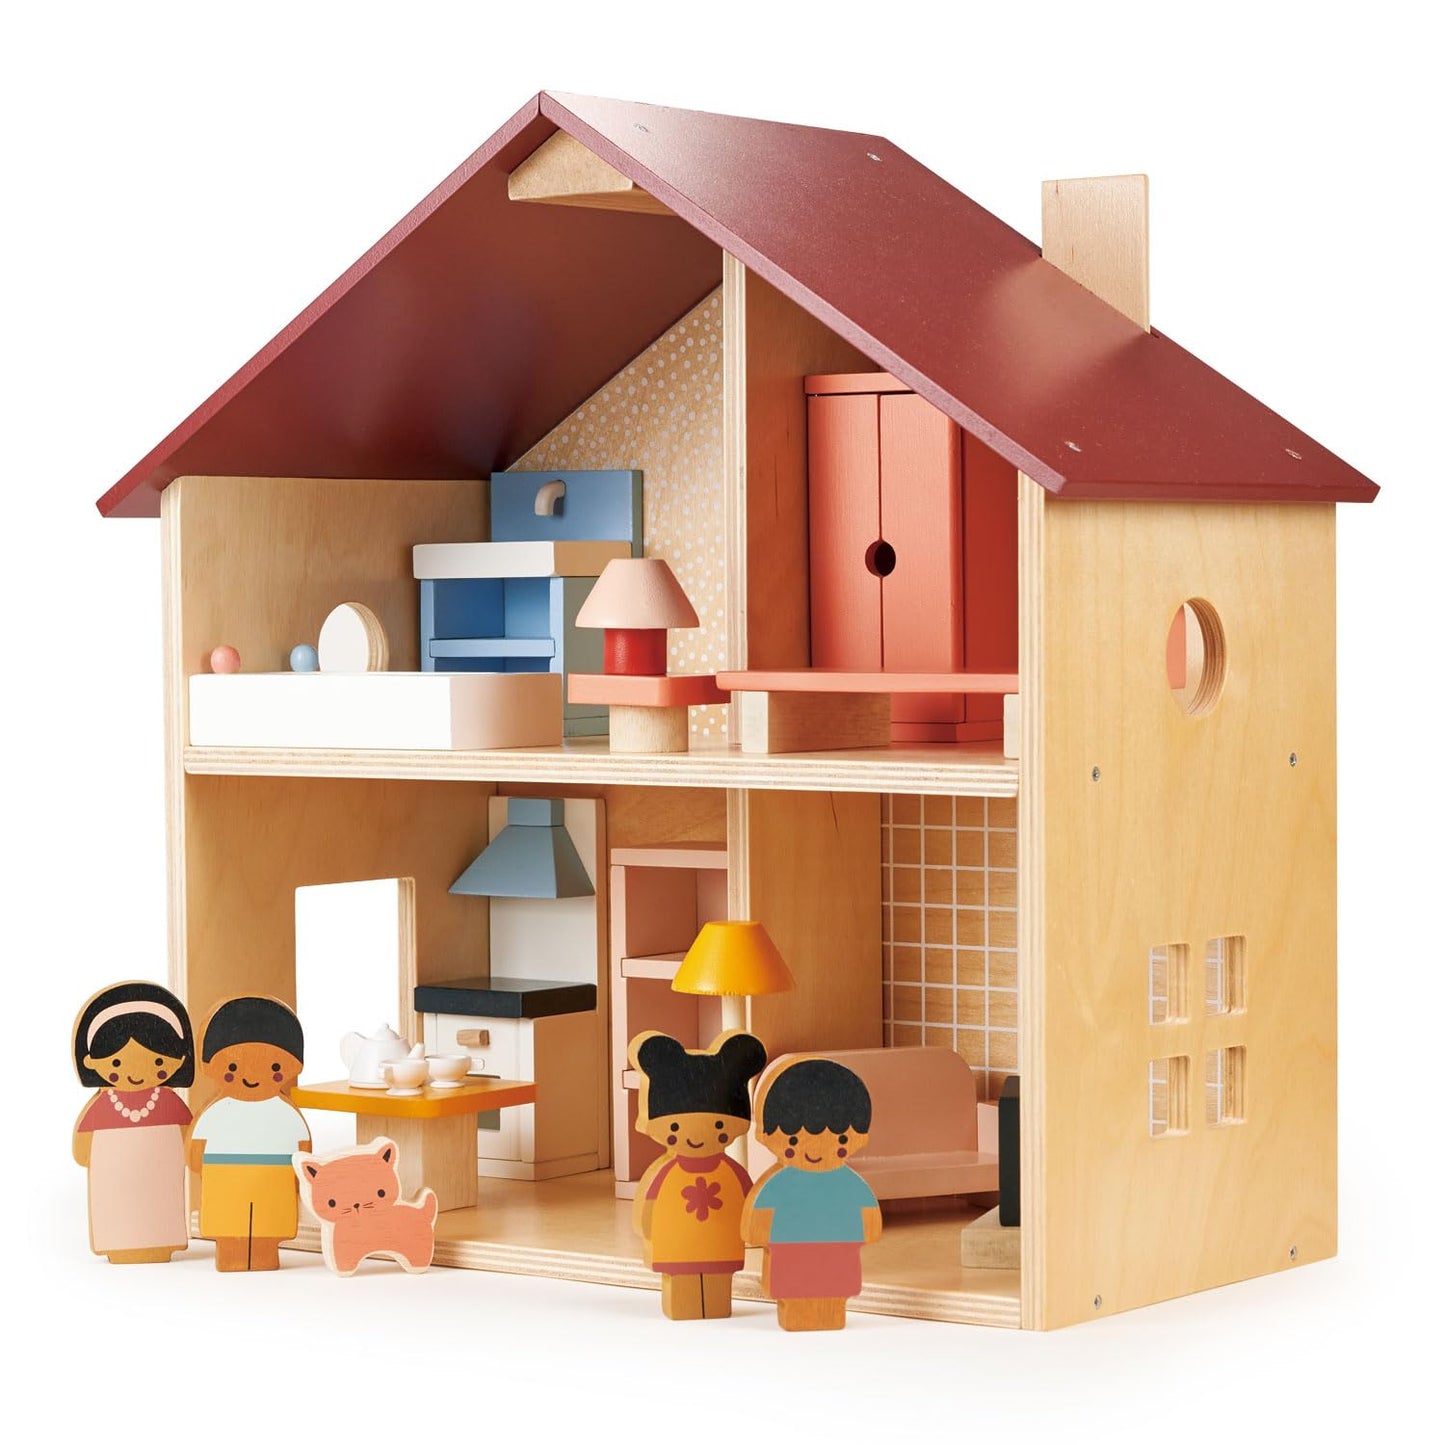 Mentari Fully Furnished Wooden Dollhouse - Compact Dollhouse for Toddlers with Open Design - Great Gift for Toddlers who are Creative and Enjoy